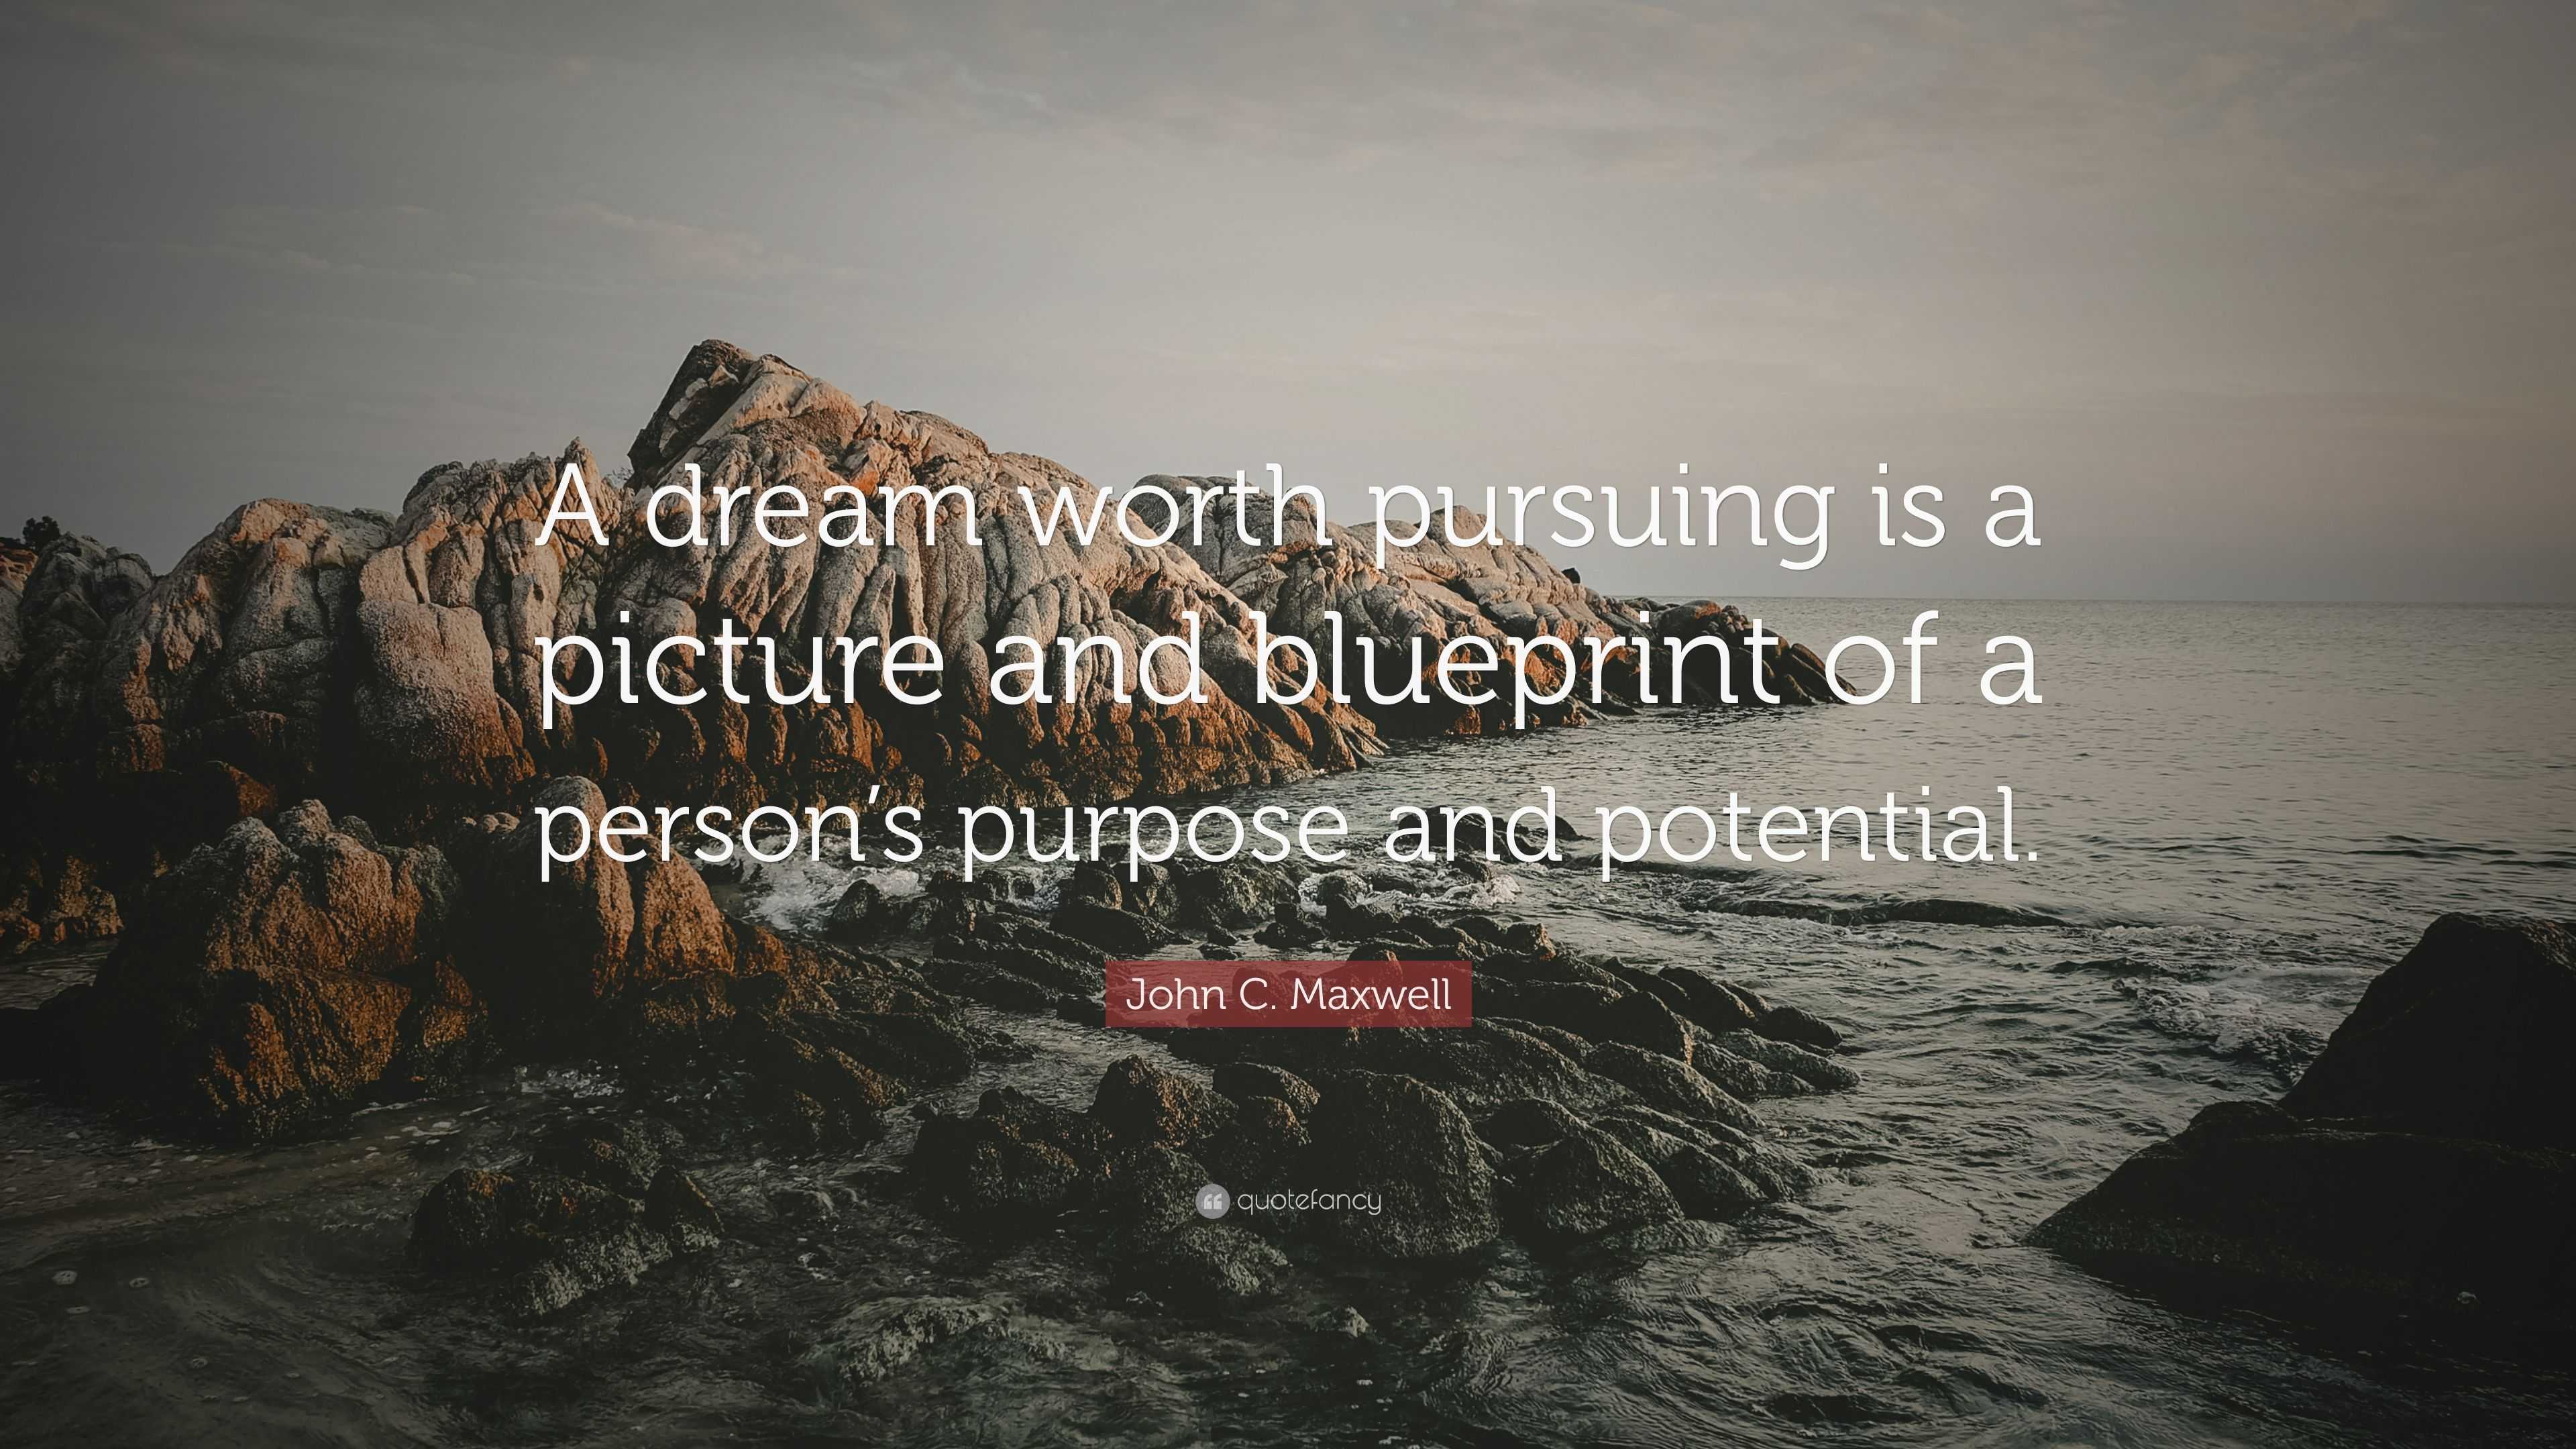 John C. Maxwell Quote: “A dream worth pursuing is a picture and ...